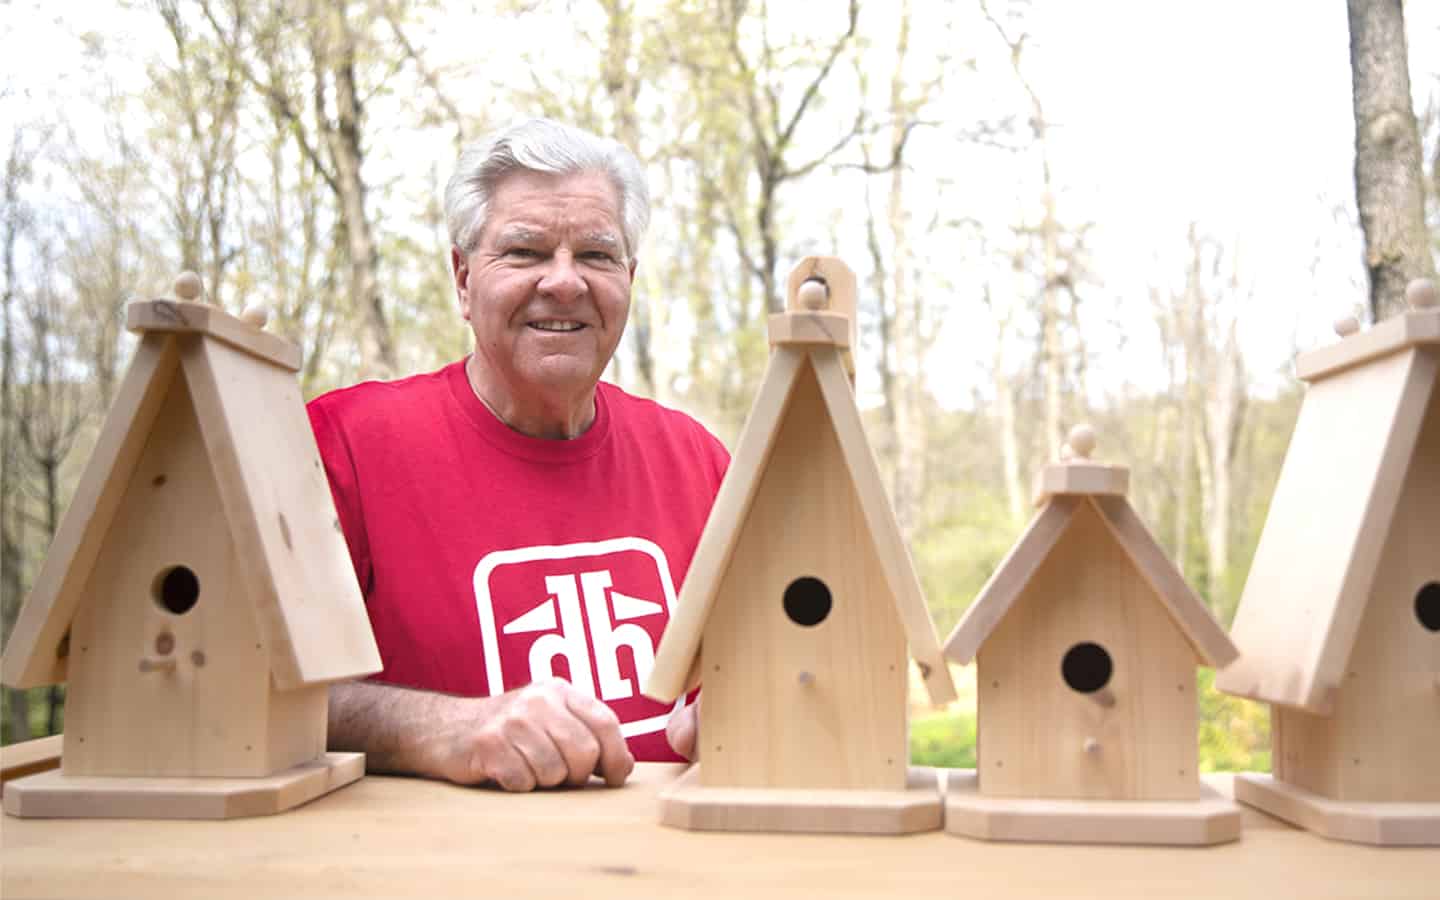 Building more than birdhouses